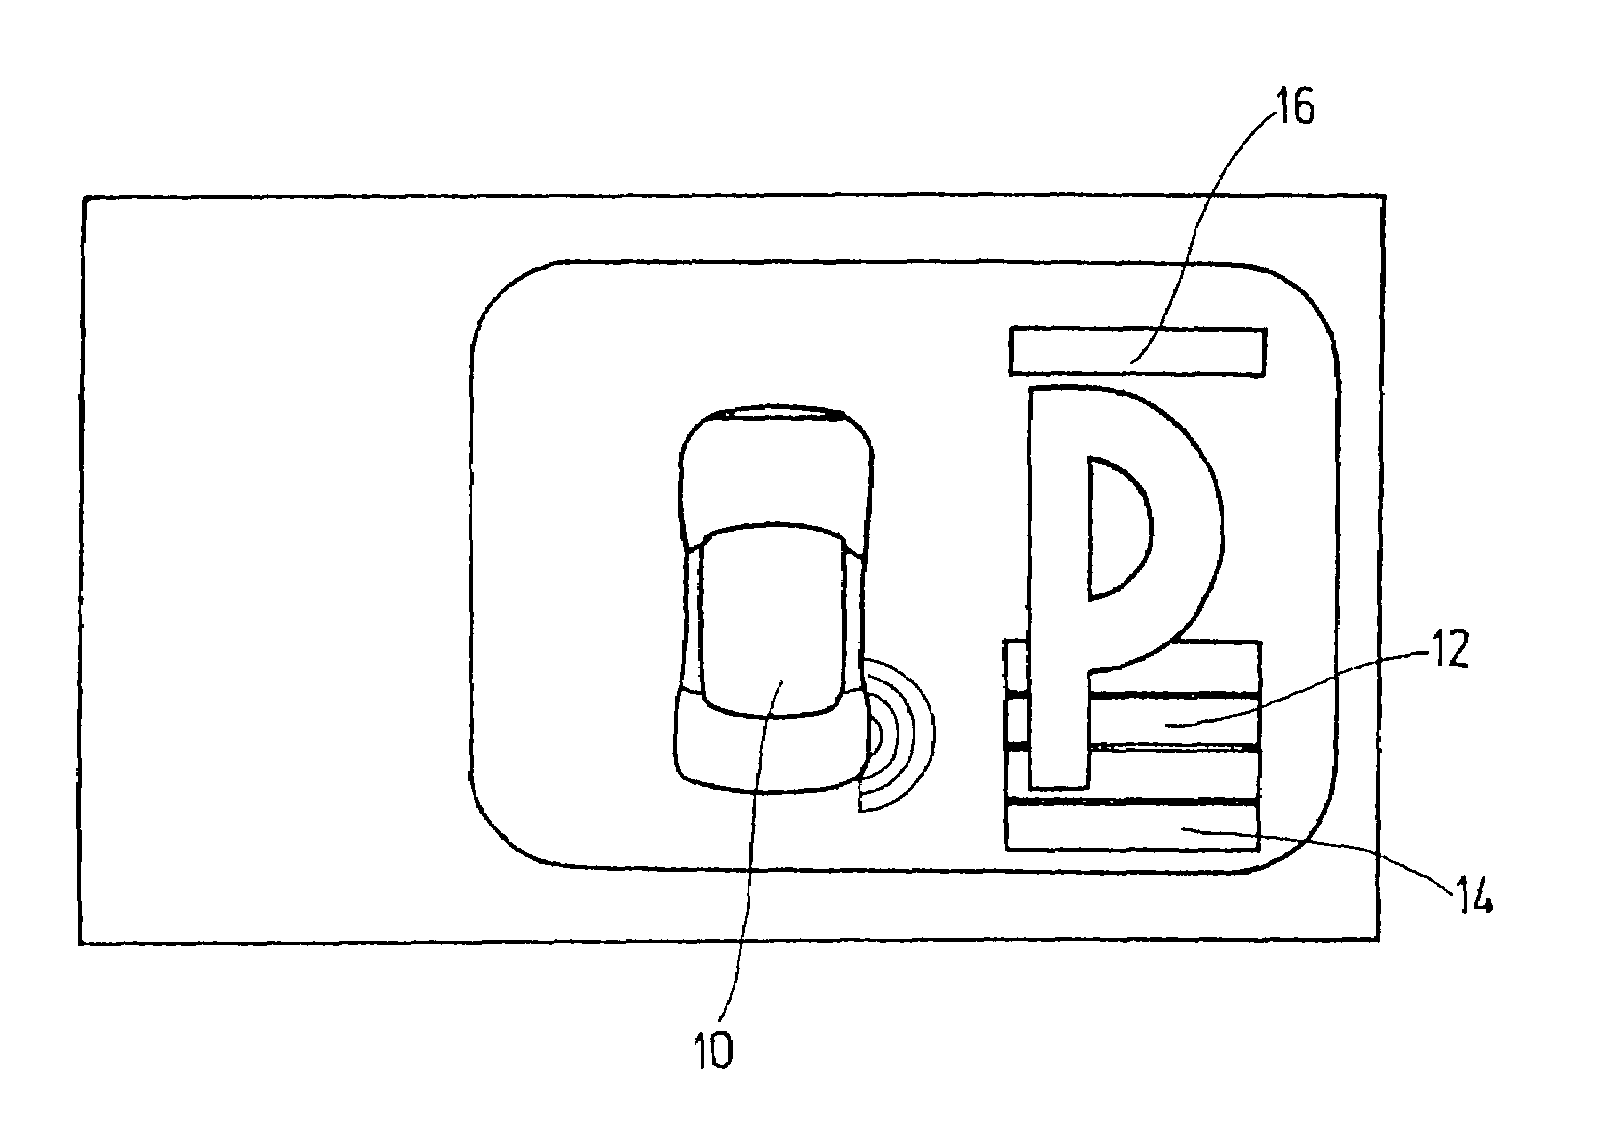 Method for providing information for parallel parking of a vehicle